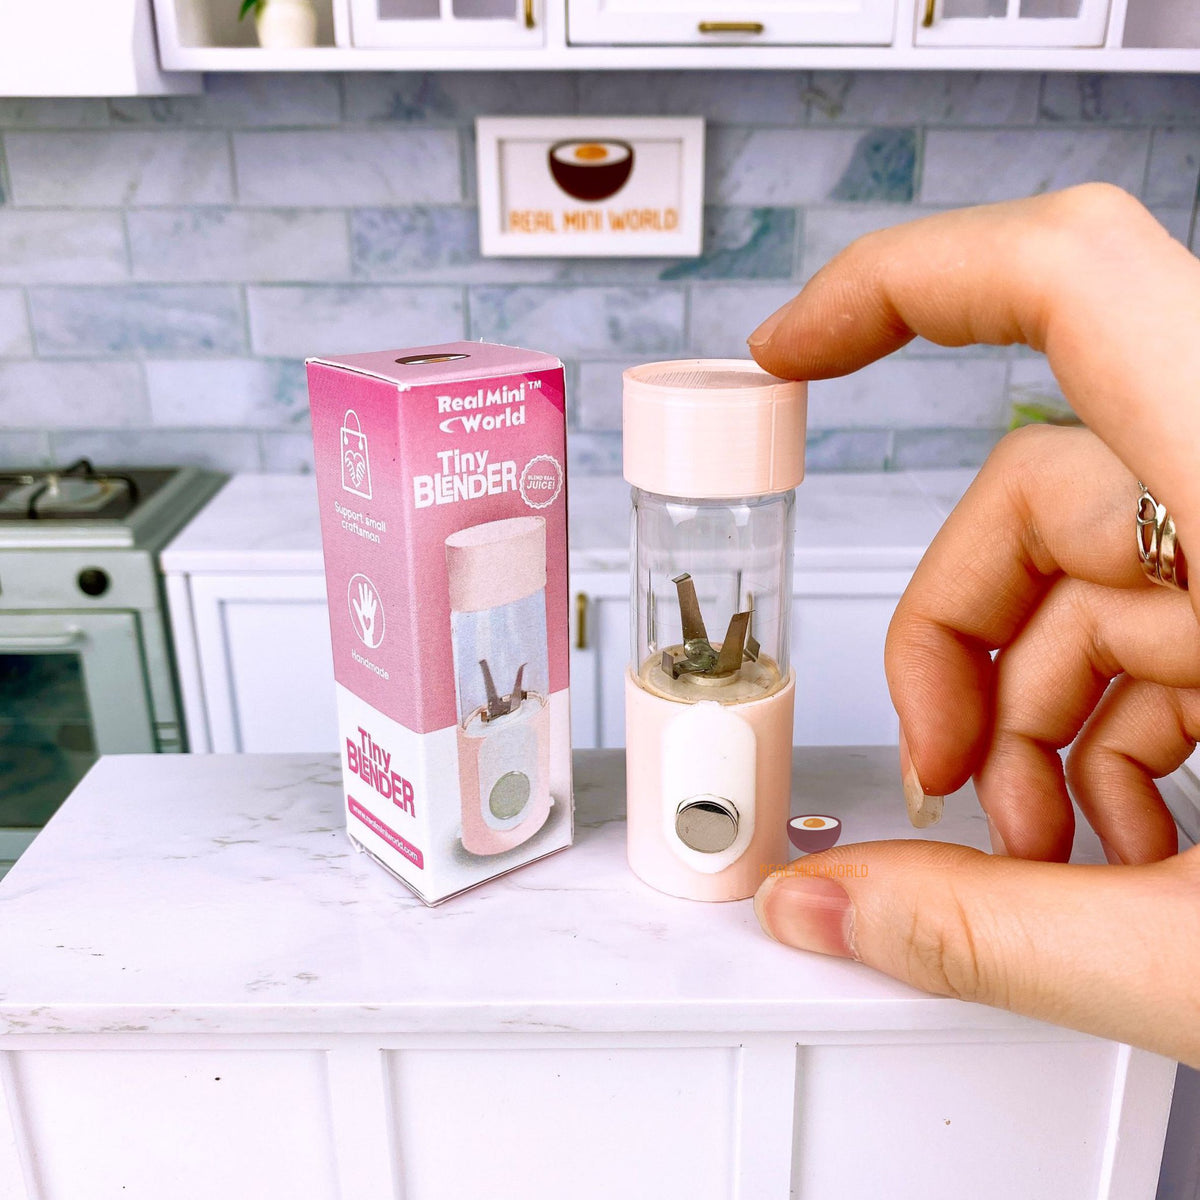 World's Smallest Blender: A tiny kitchen appliance that really mixes!